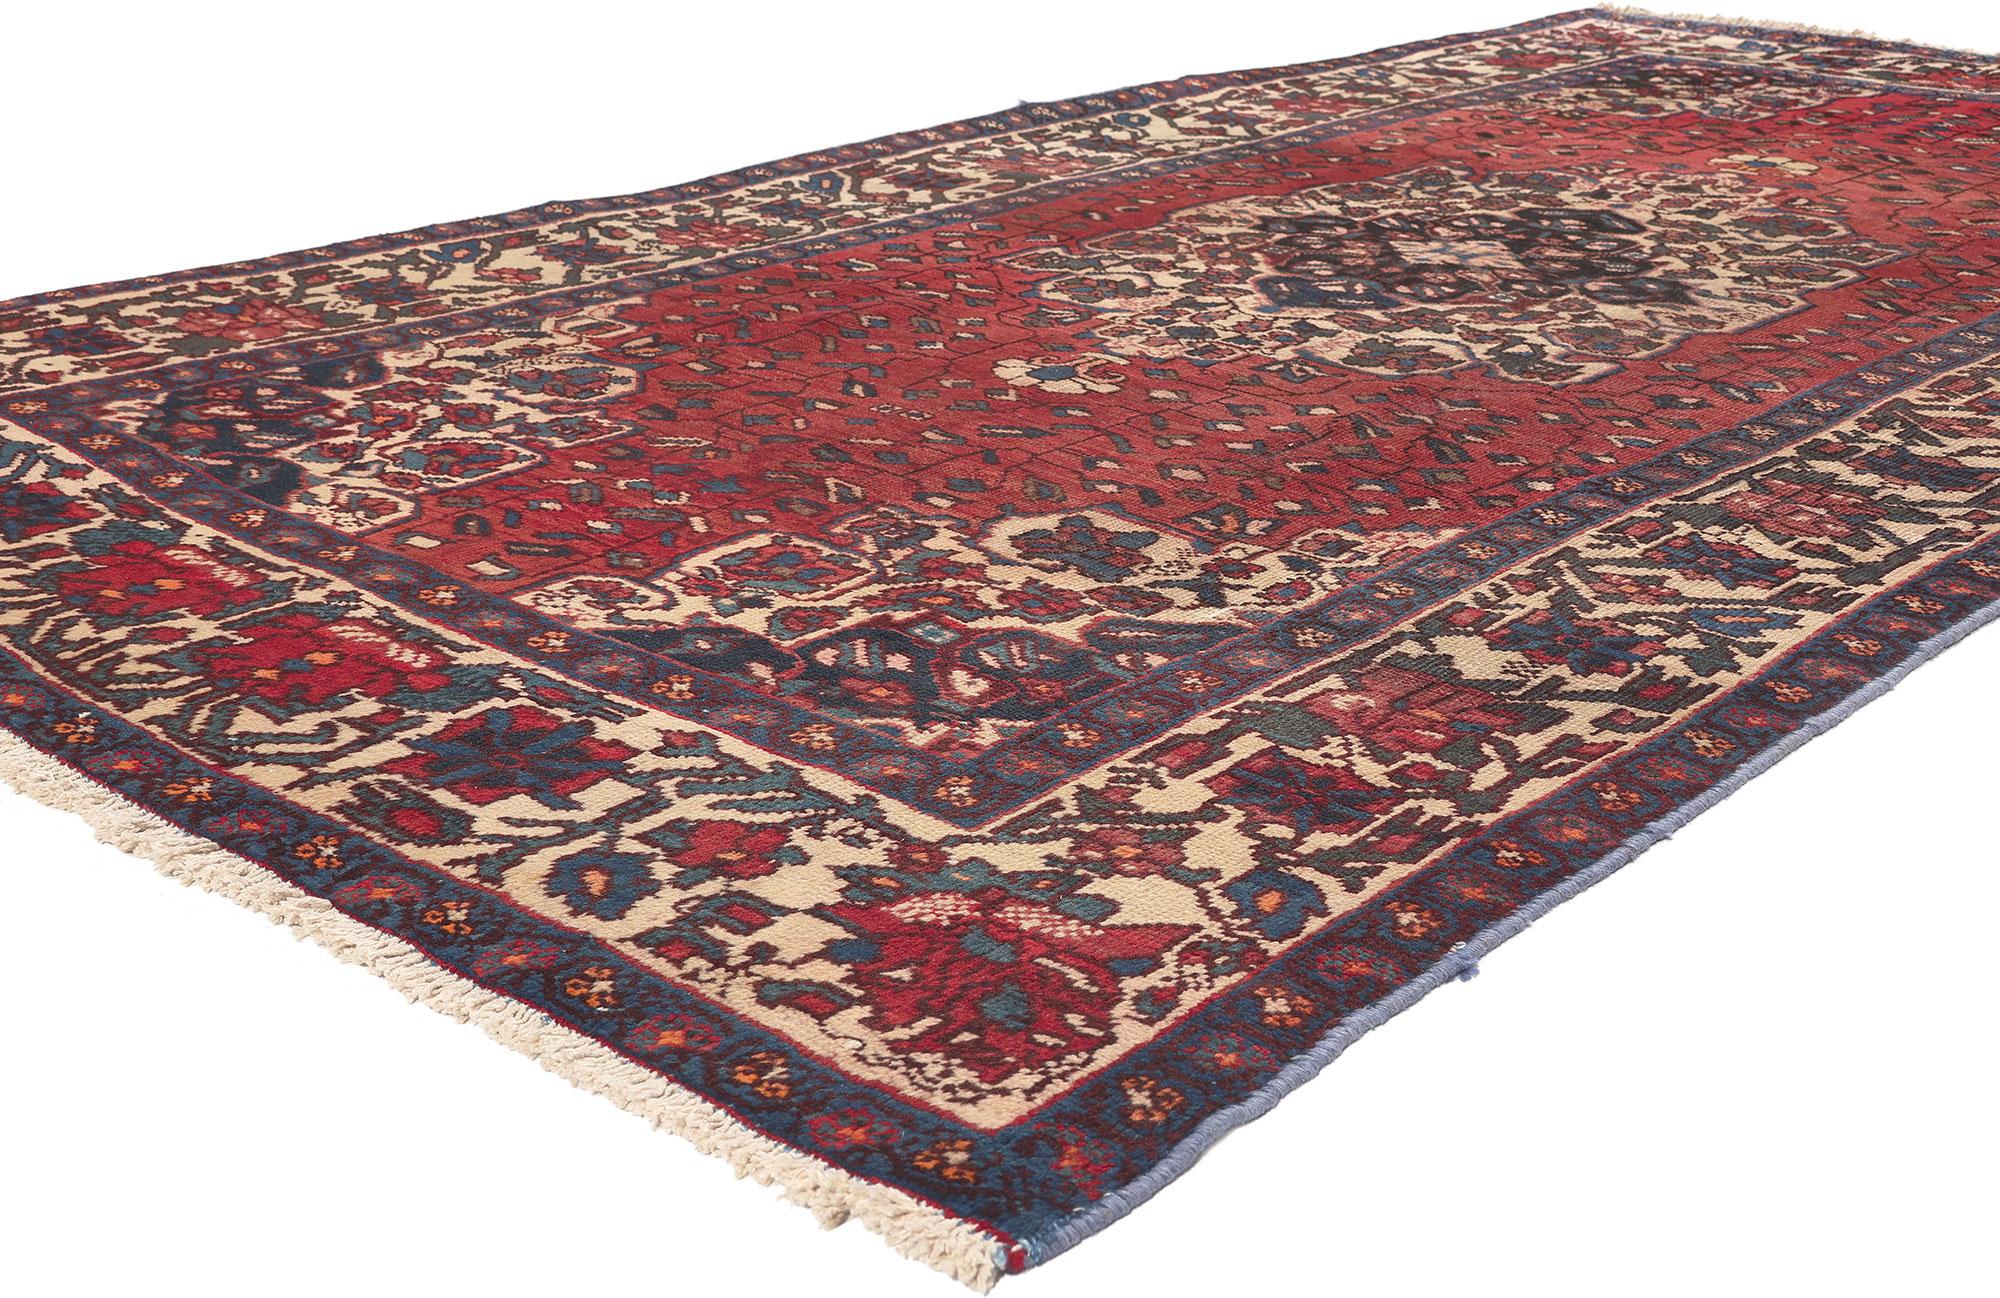 74581 Vintage Persian Mahal Rug, 05’01 x 09’11. 
Perpetually posh meets Elizabethan style in this hand knotted wool vintage Persian Mahal rug. The eye-catching decorative details and rich color palette woven into this piece work together resulting